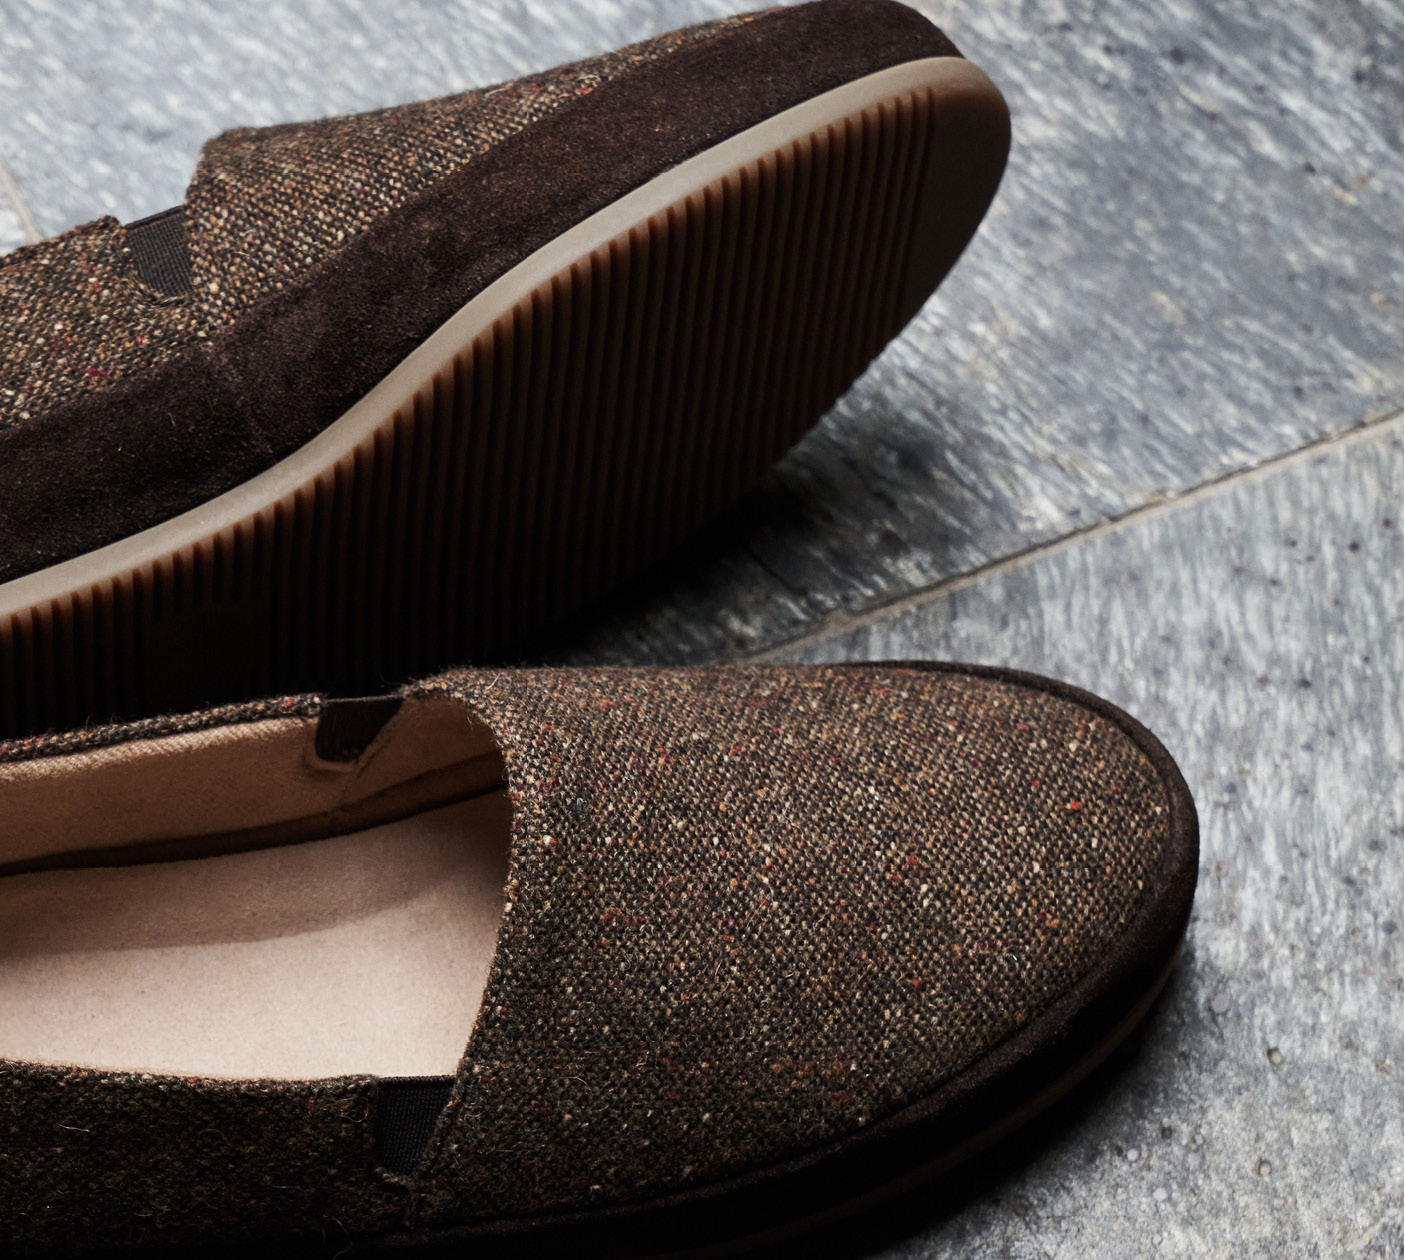 Luxury Slippers for Men - Brown Donegal Tweed House Shoes